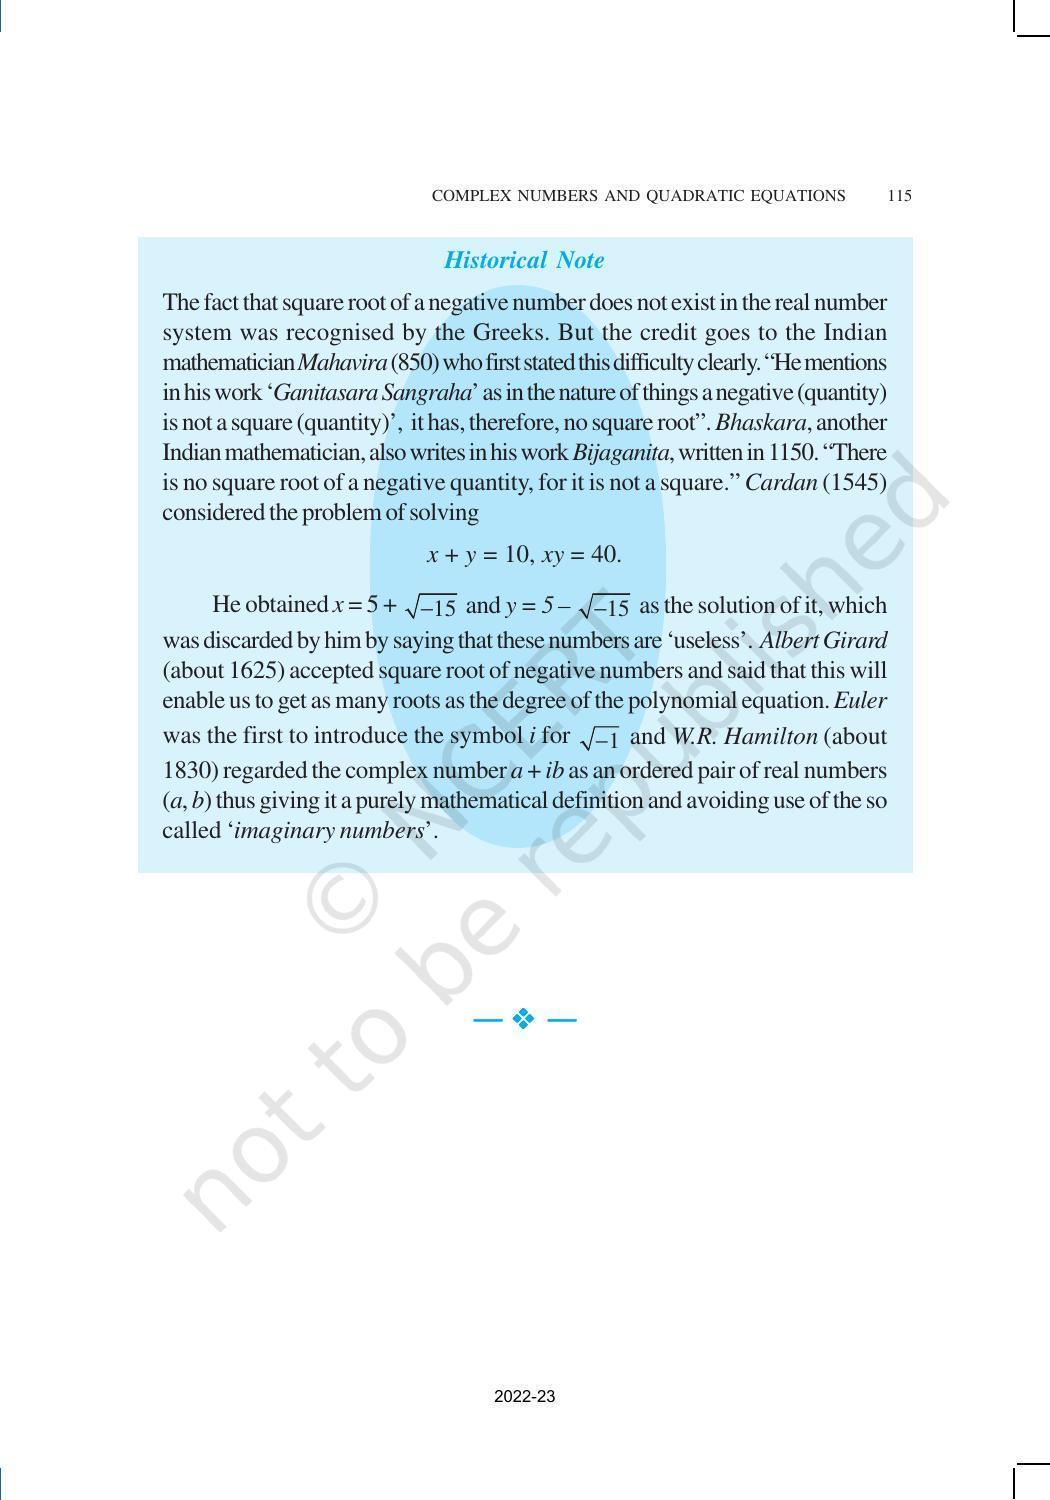 NCERT Book for Class 11 Maths Chapter 5 Complex Numbers and Quadratic Equations - Page 19